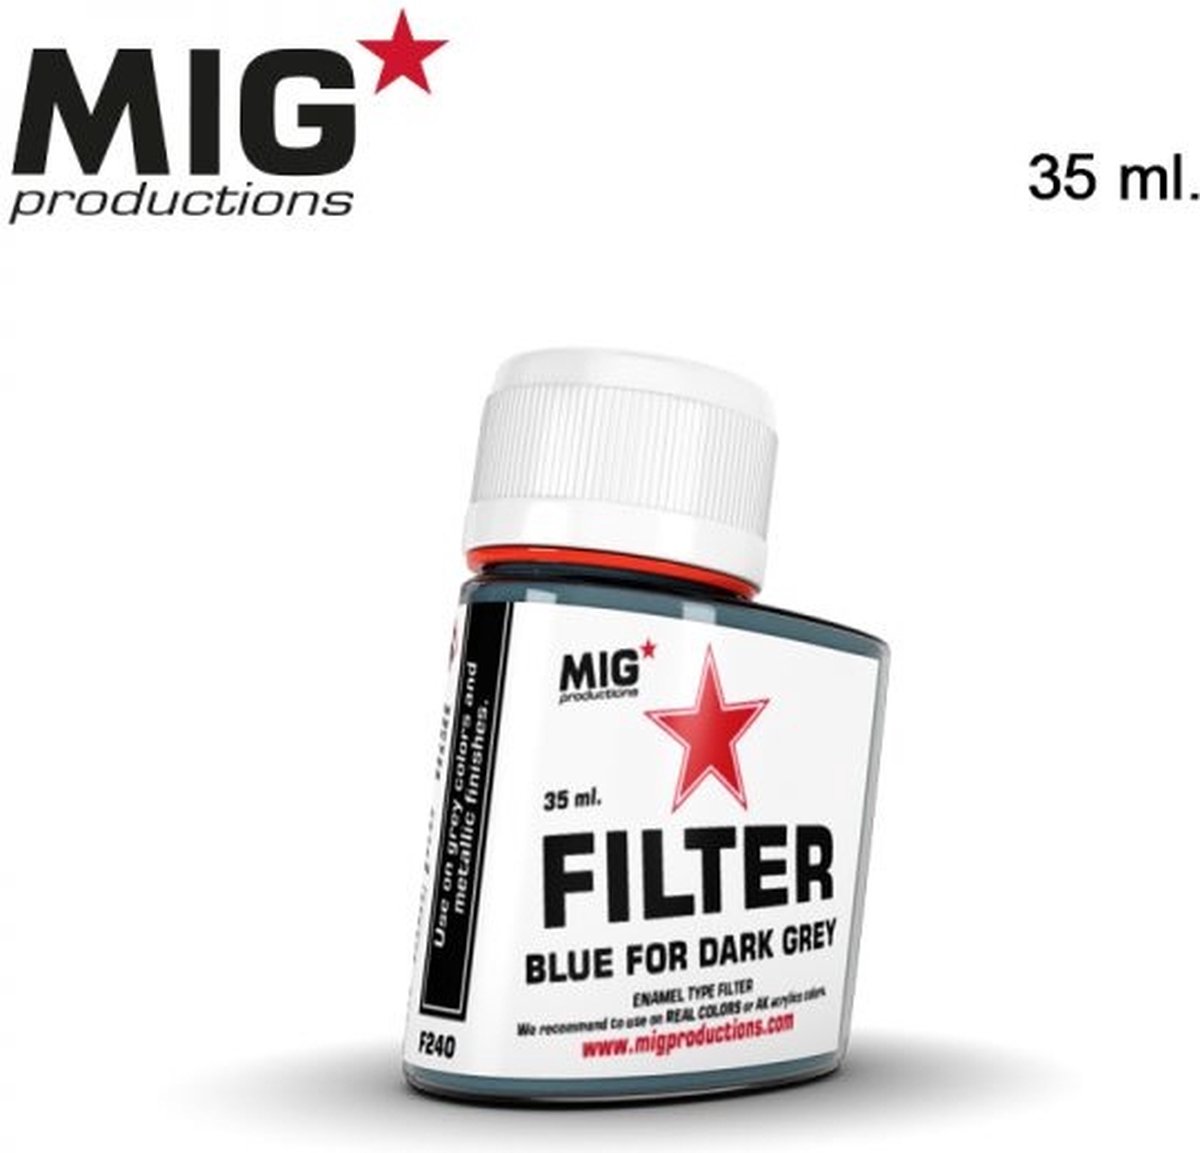 MIG Productions - F240 - Blue Filter for Dark Grey - 35ml -